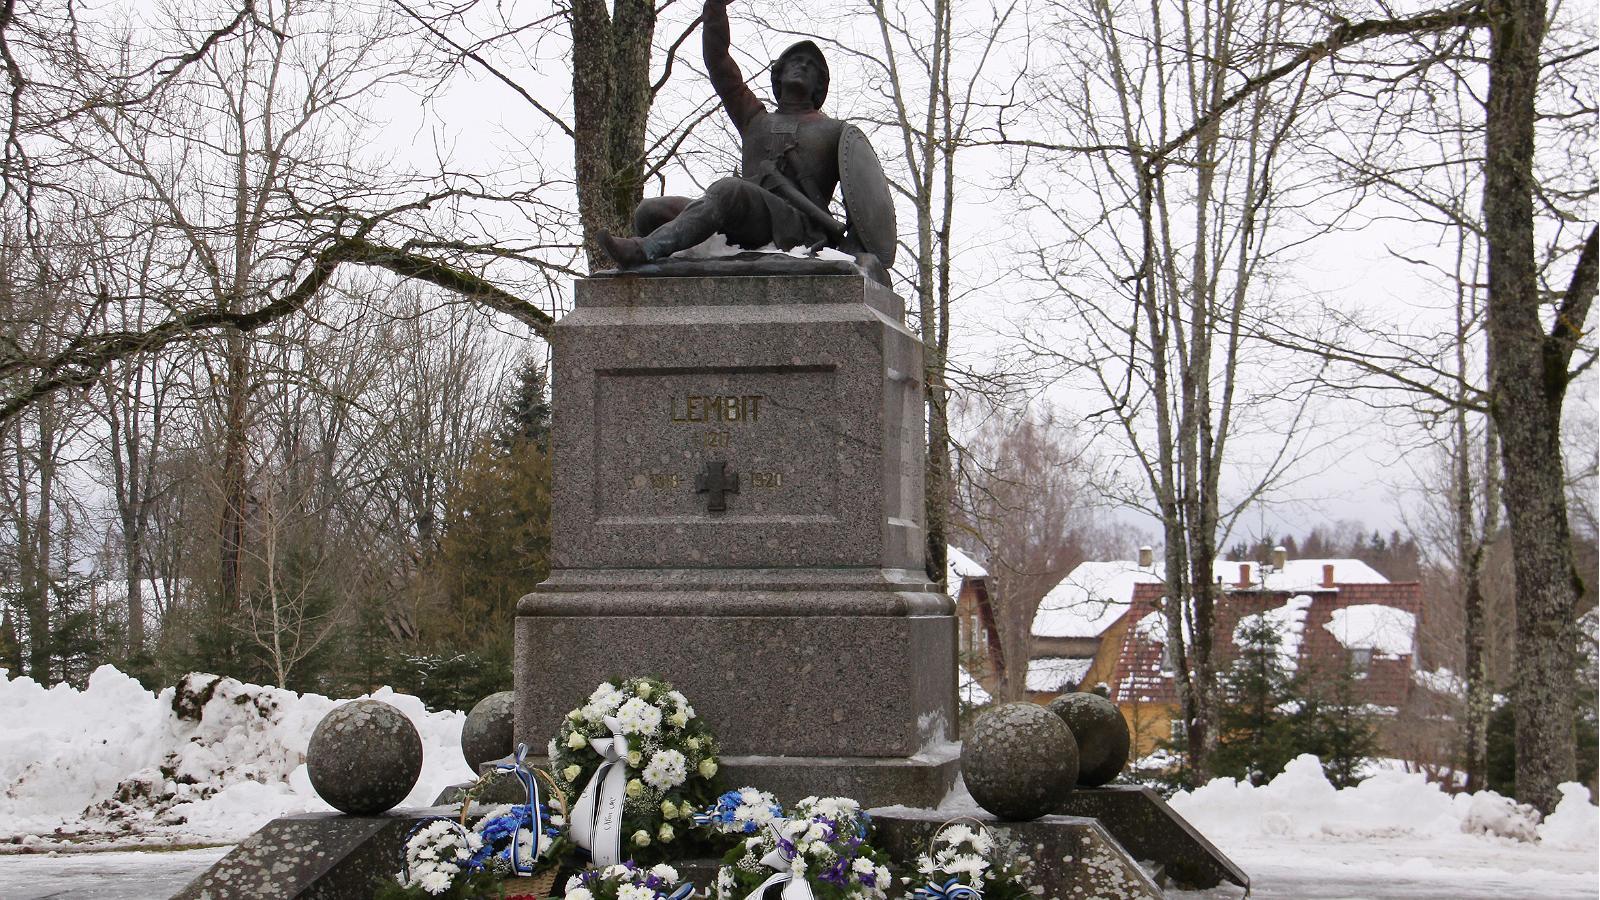 Lembitu, monument to the victims of the War of Independence in Suure-Jaani (Leili Kuusk).